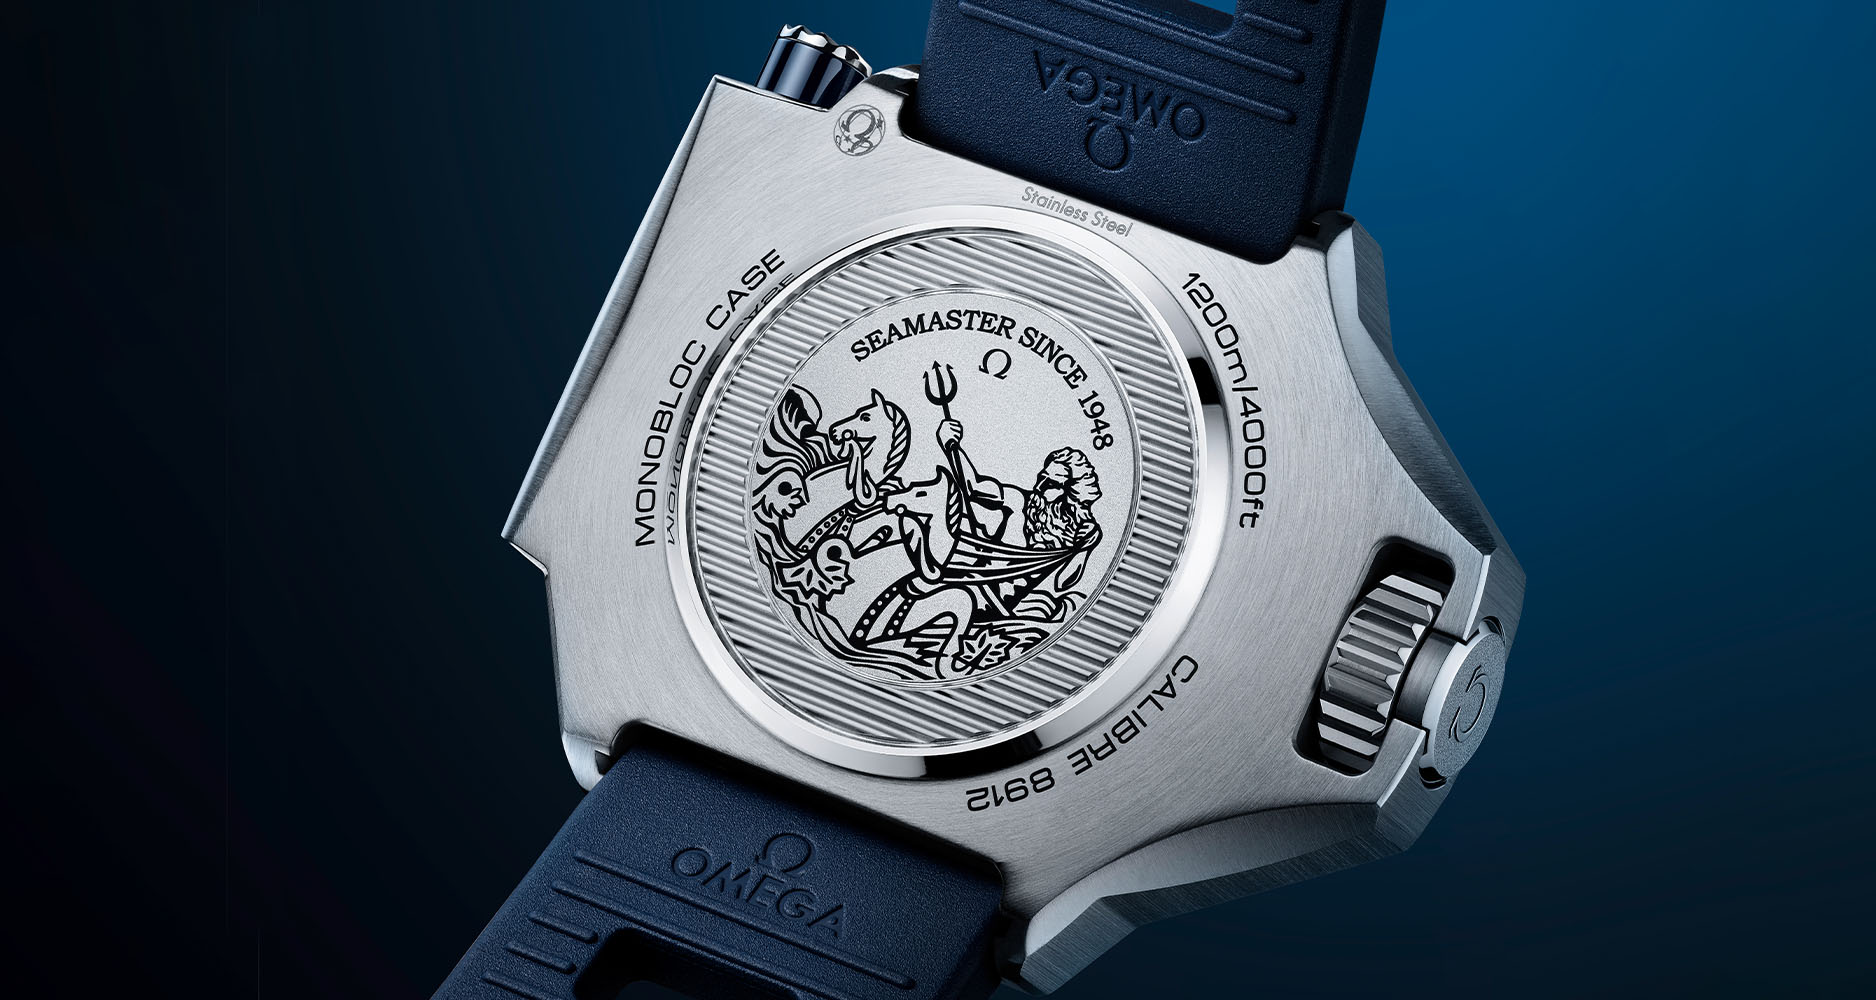 The caseback of the Omega Seamaster Ploprof reveals the engraving of the god Poseidon and seahorse-led chariot.